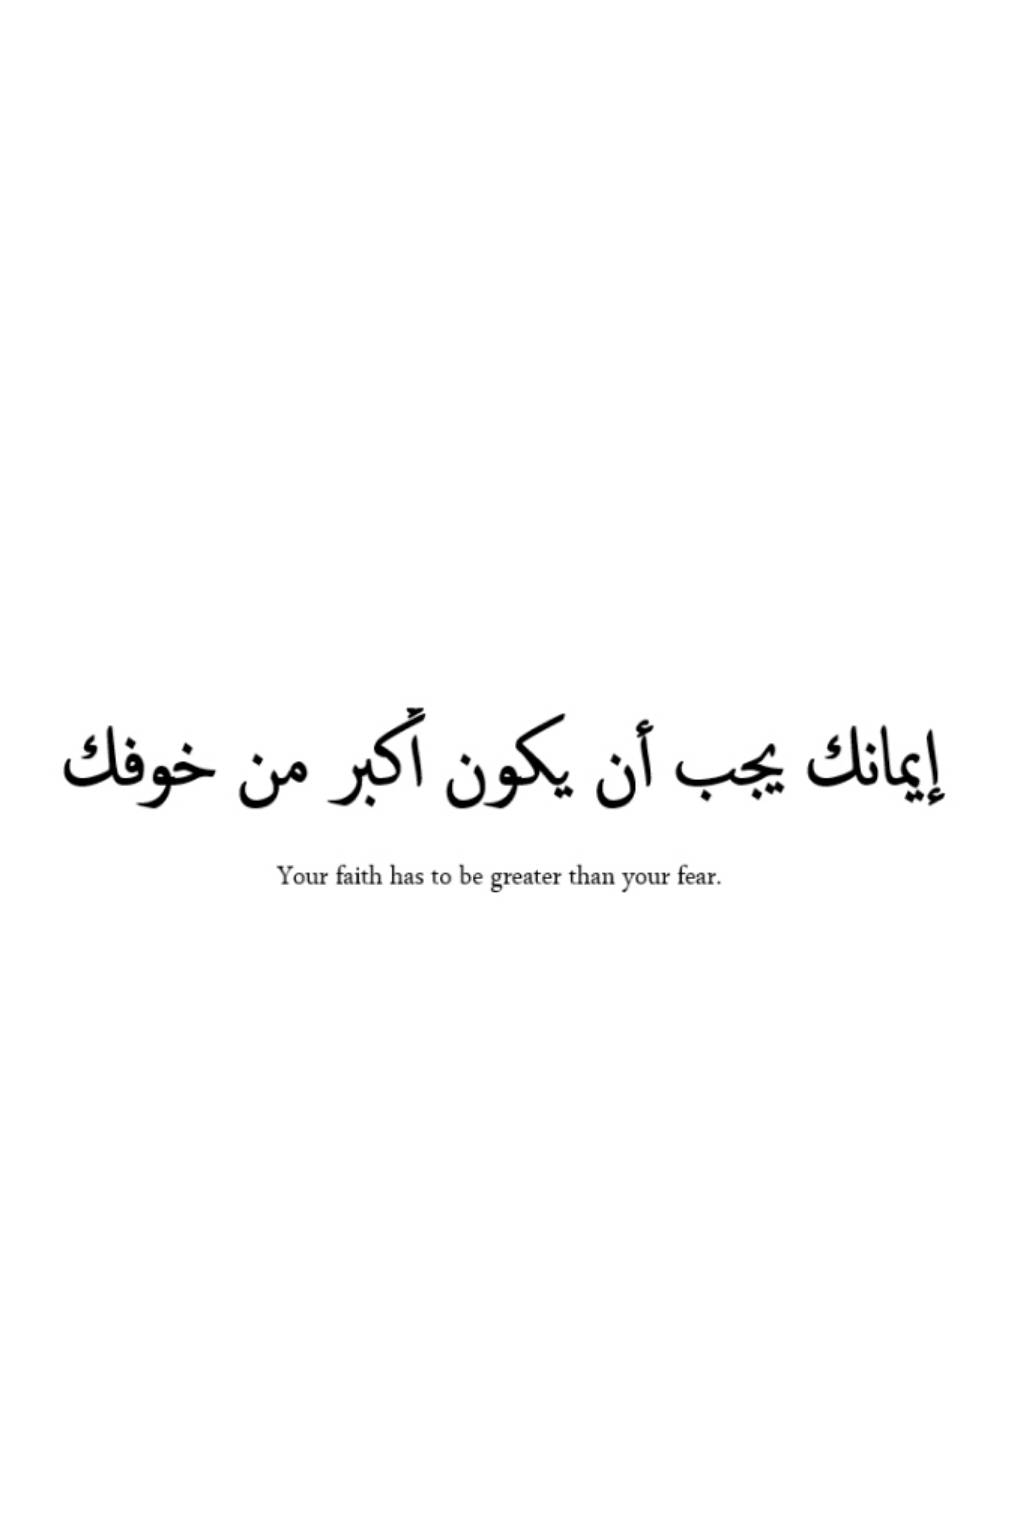 Quotes About Family In Arabic. QuotesGram